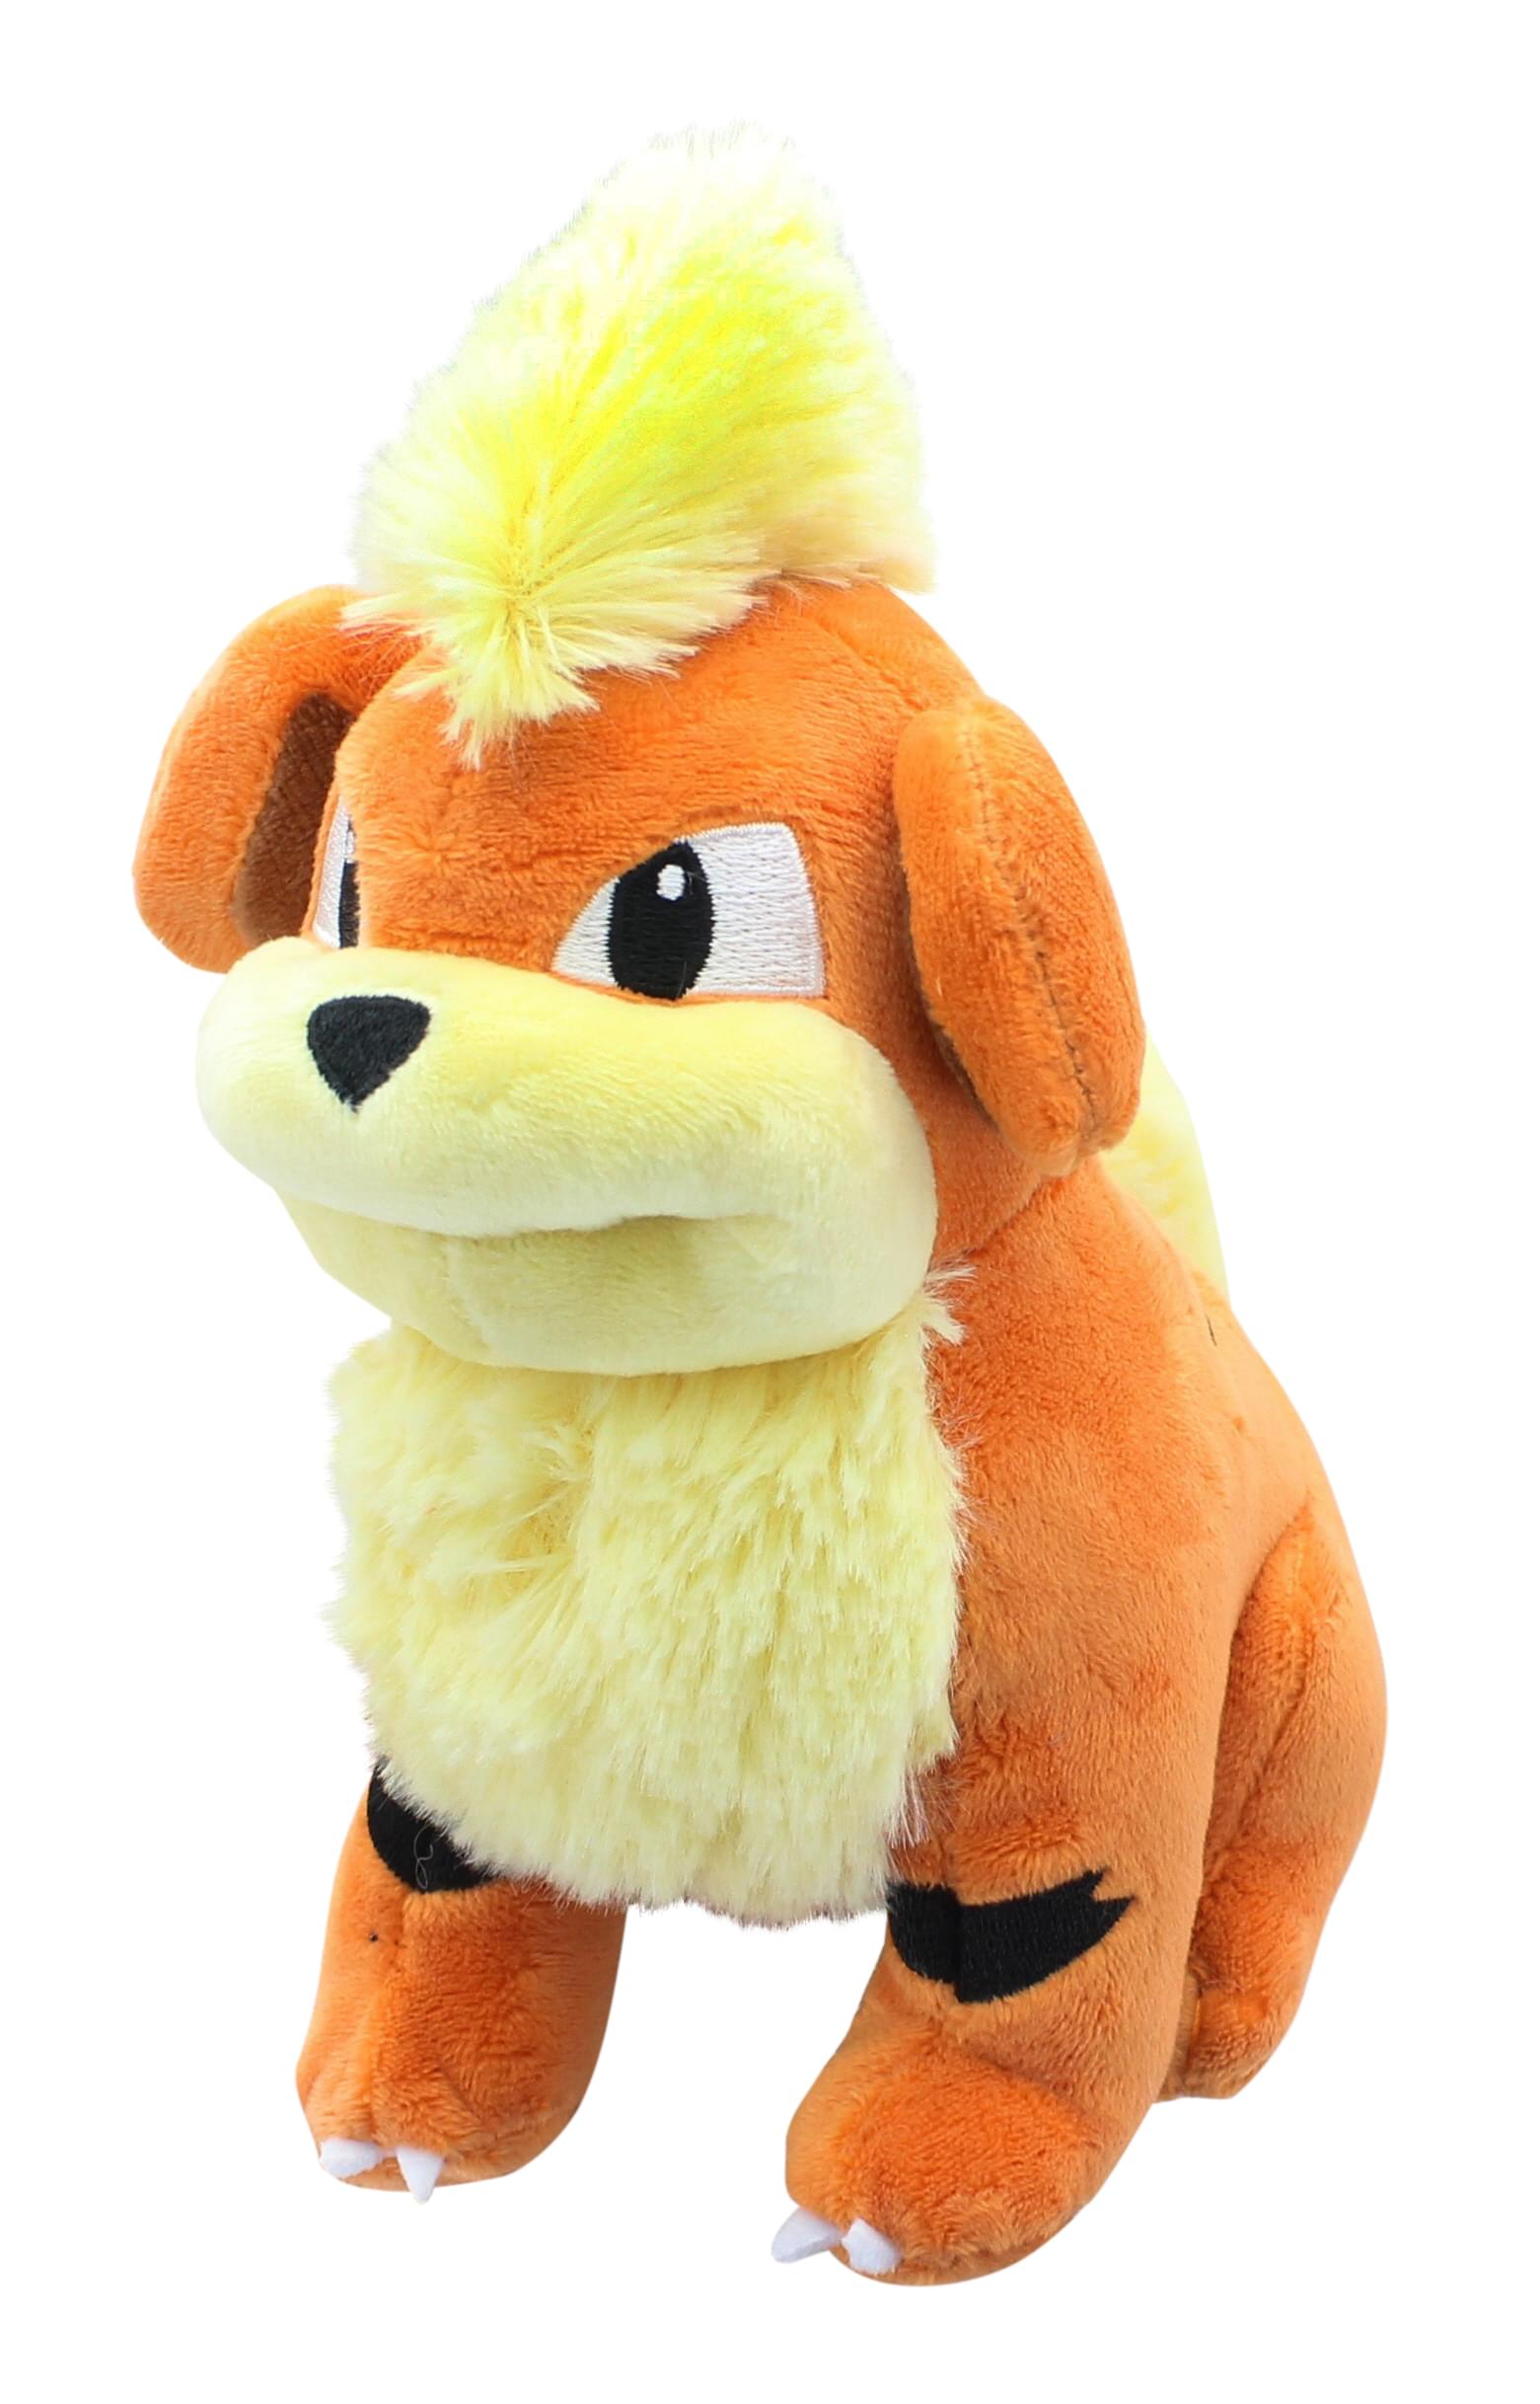 Pokemon Growlithe 7 Inch Collectible Character Plush